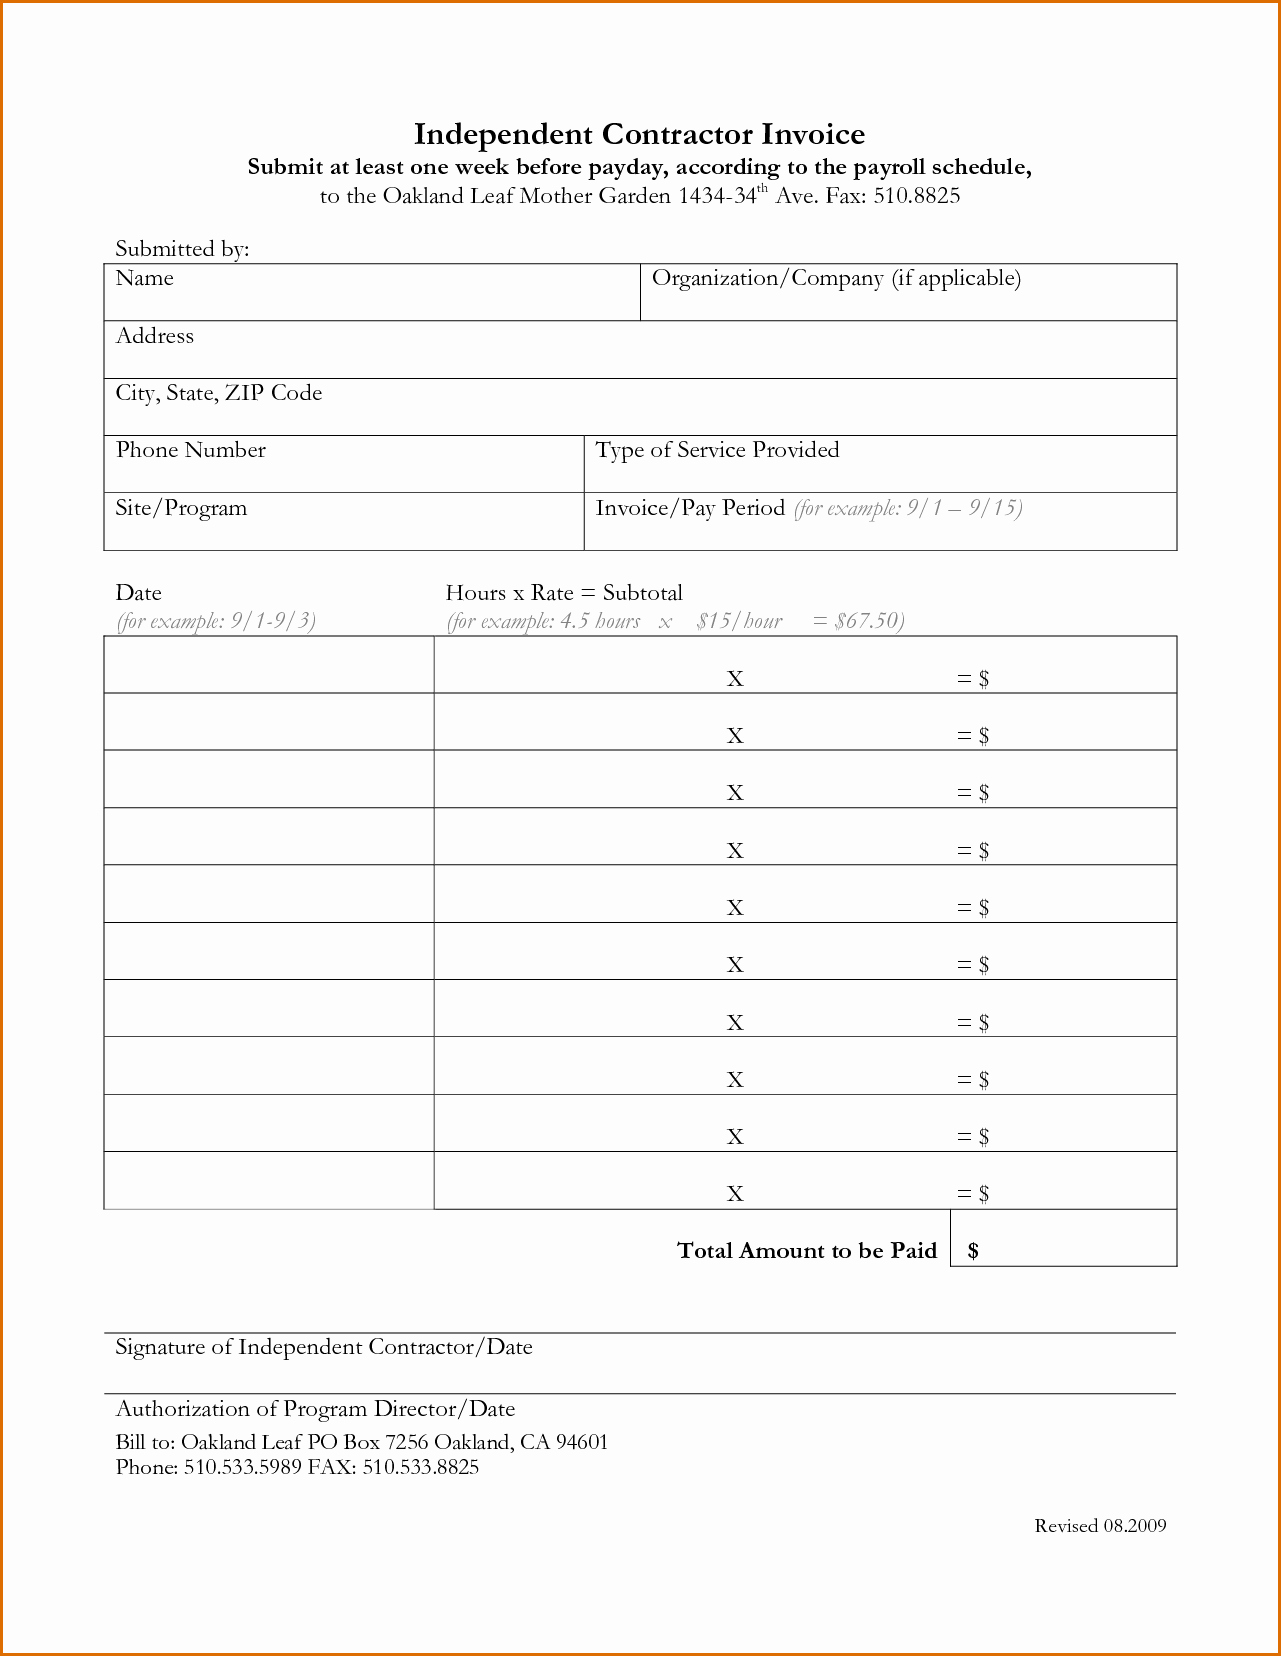 Independent Contractor Invoice Template Pdf Lovely 10 Independent Contractor Invoice Template